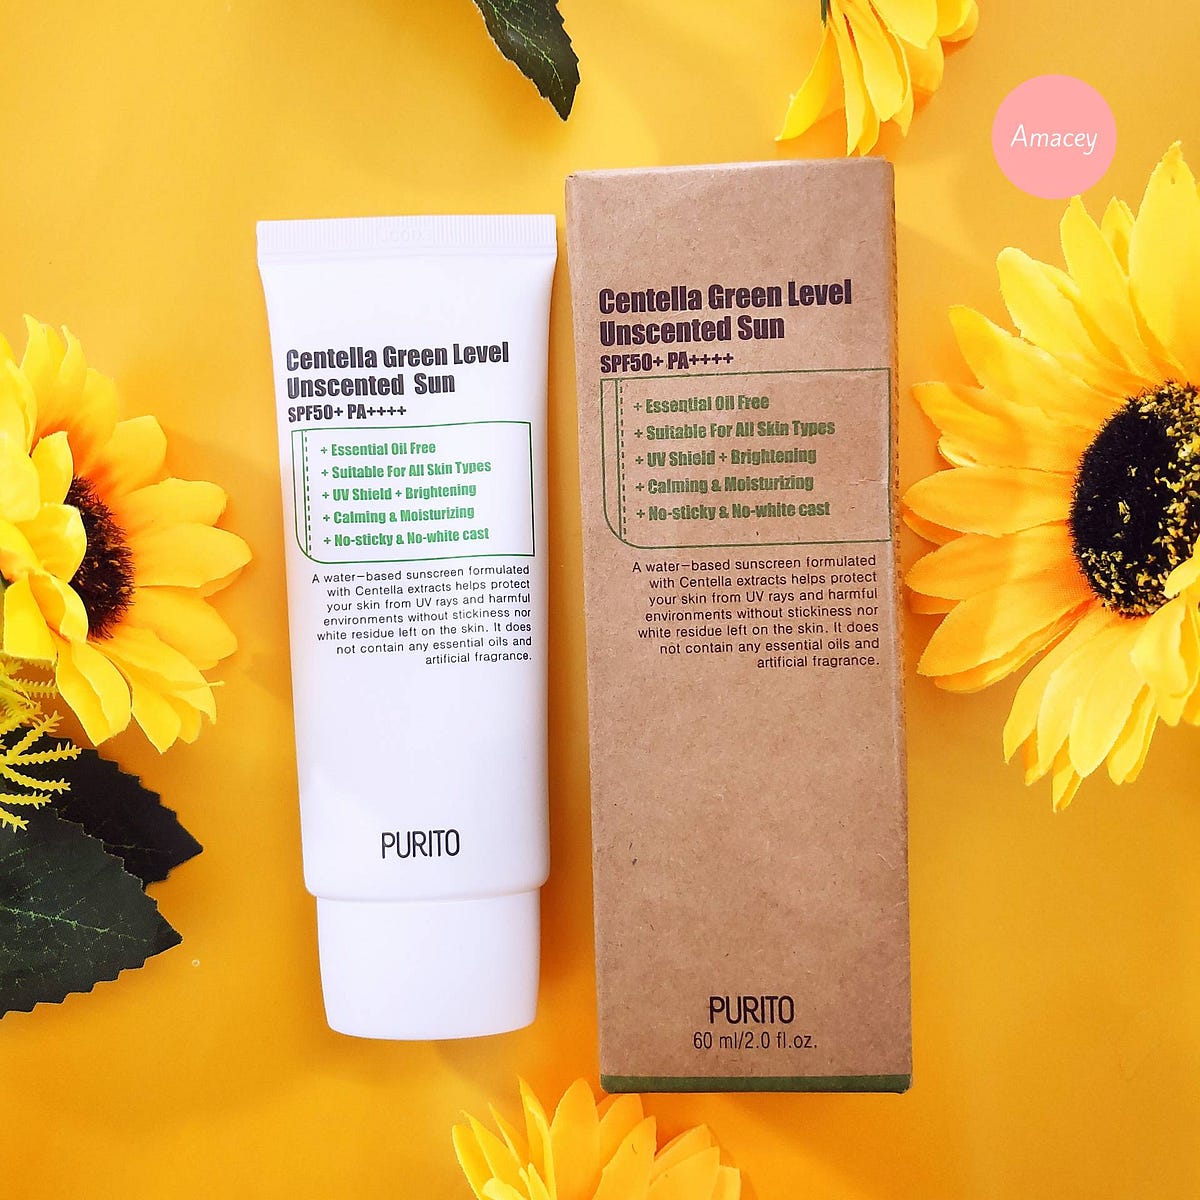 Kem Chống Nắng Purito Centella Green Level Unscented Sun [Review] - mặt trước